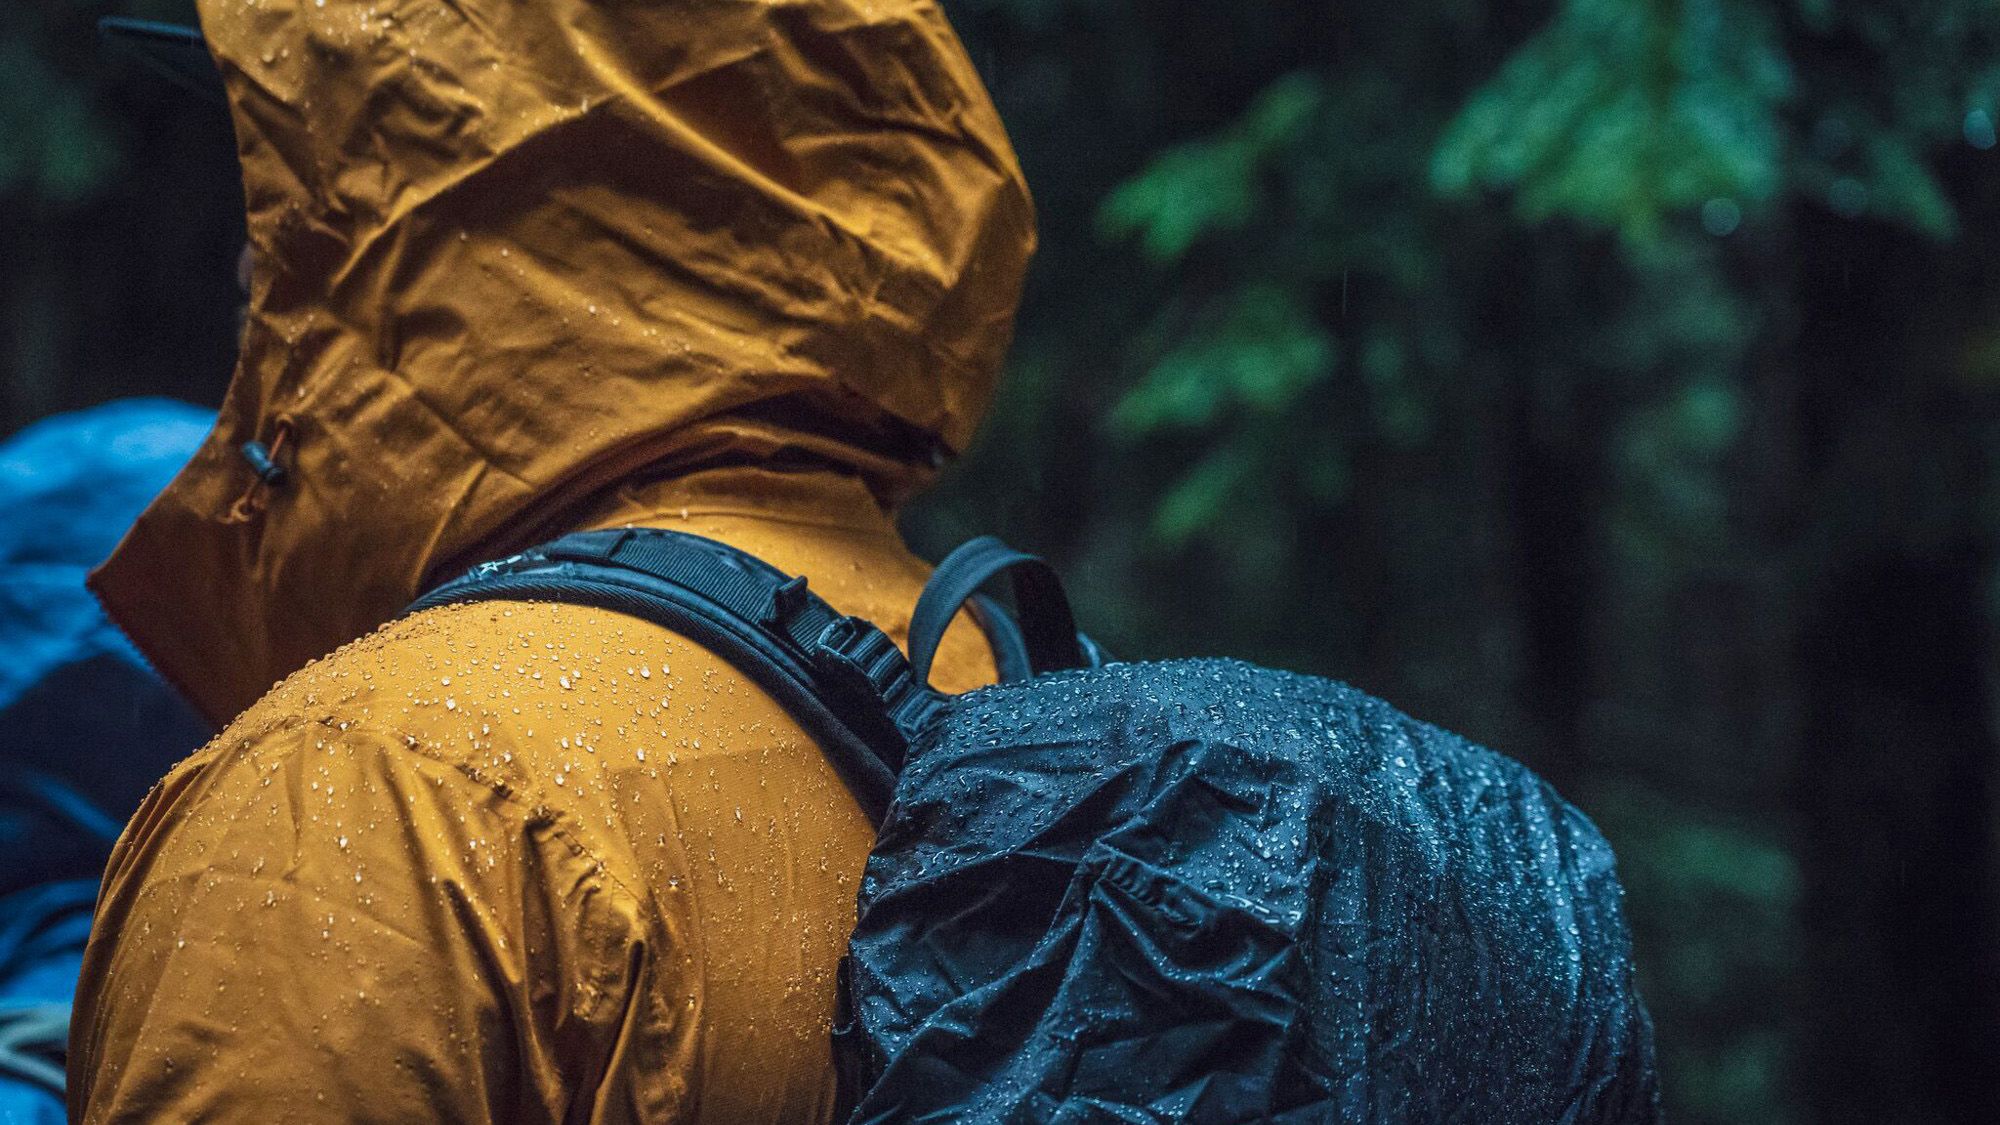 YOU'RE WASHING YOUR OUTDOOR KIT WRONG